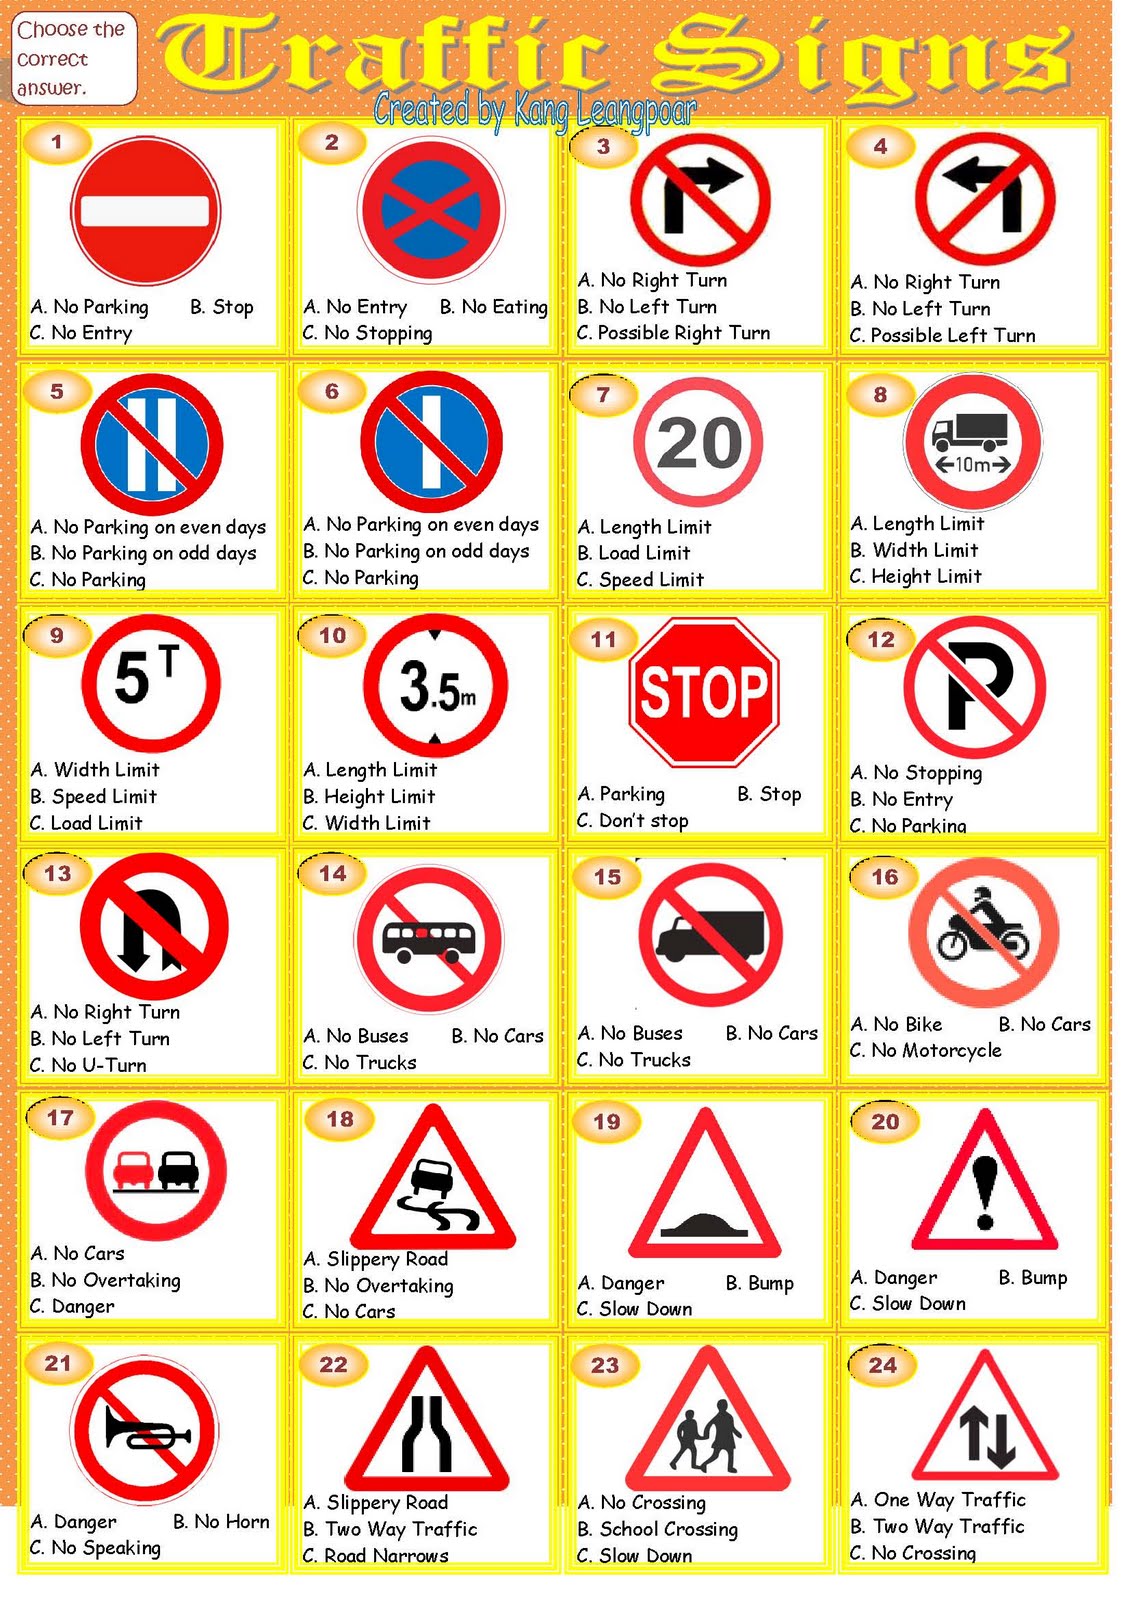 Traffic Signs And Their Meanings - vrogue.co